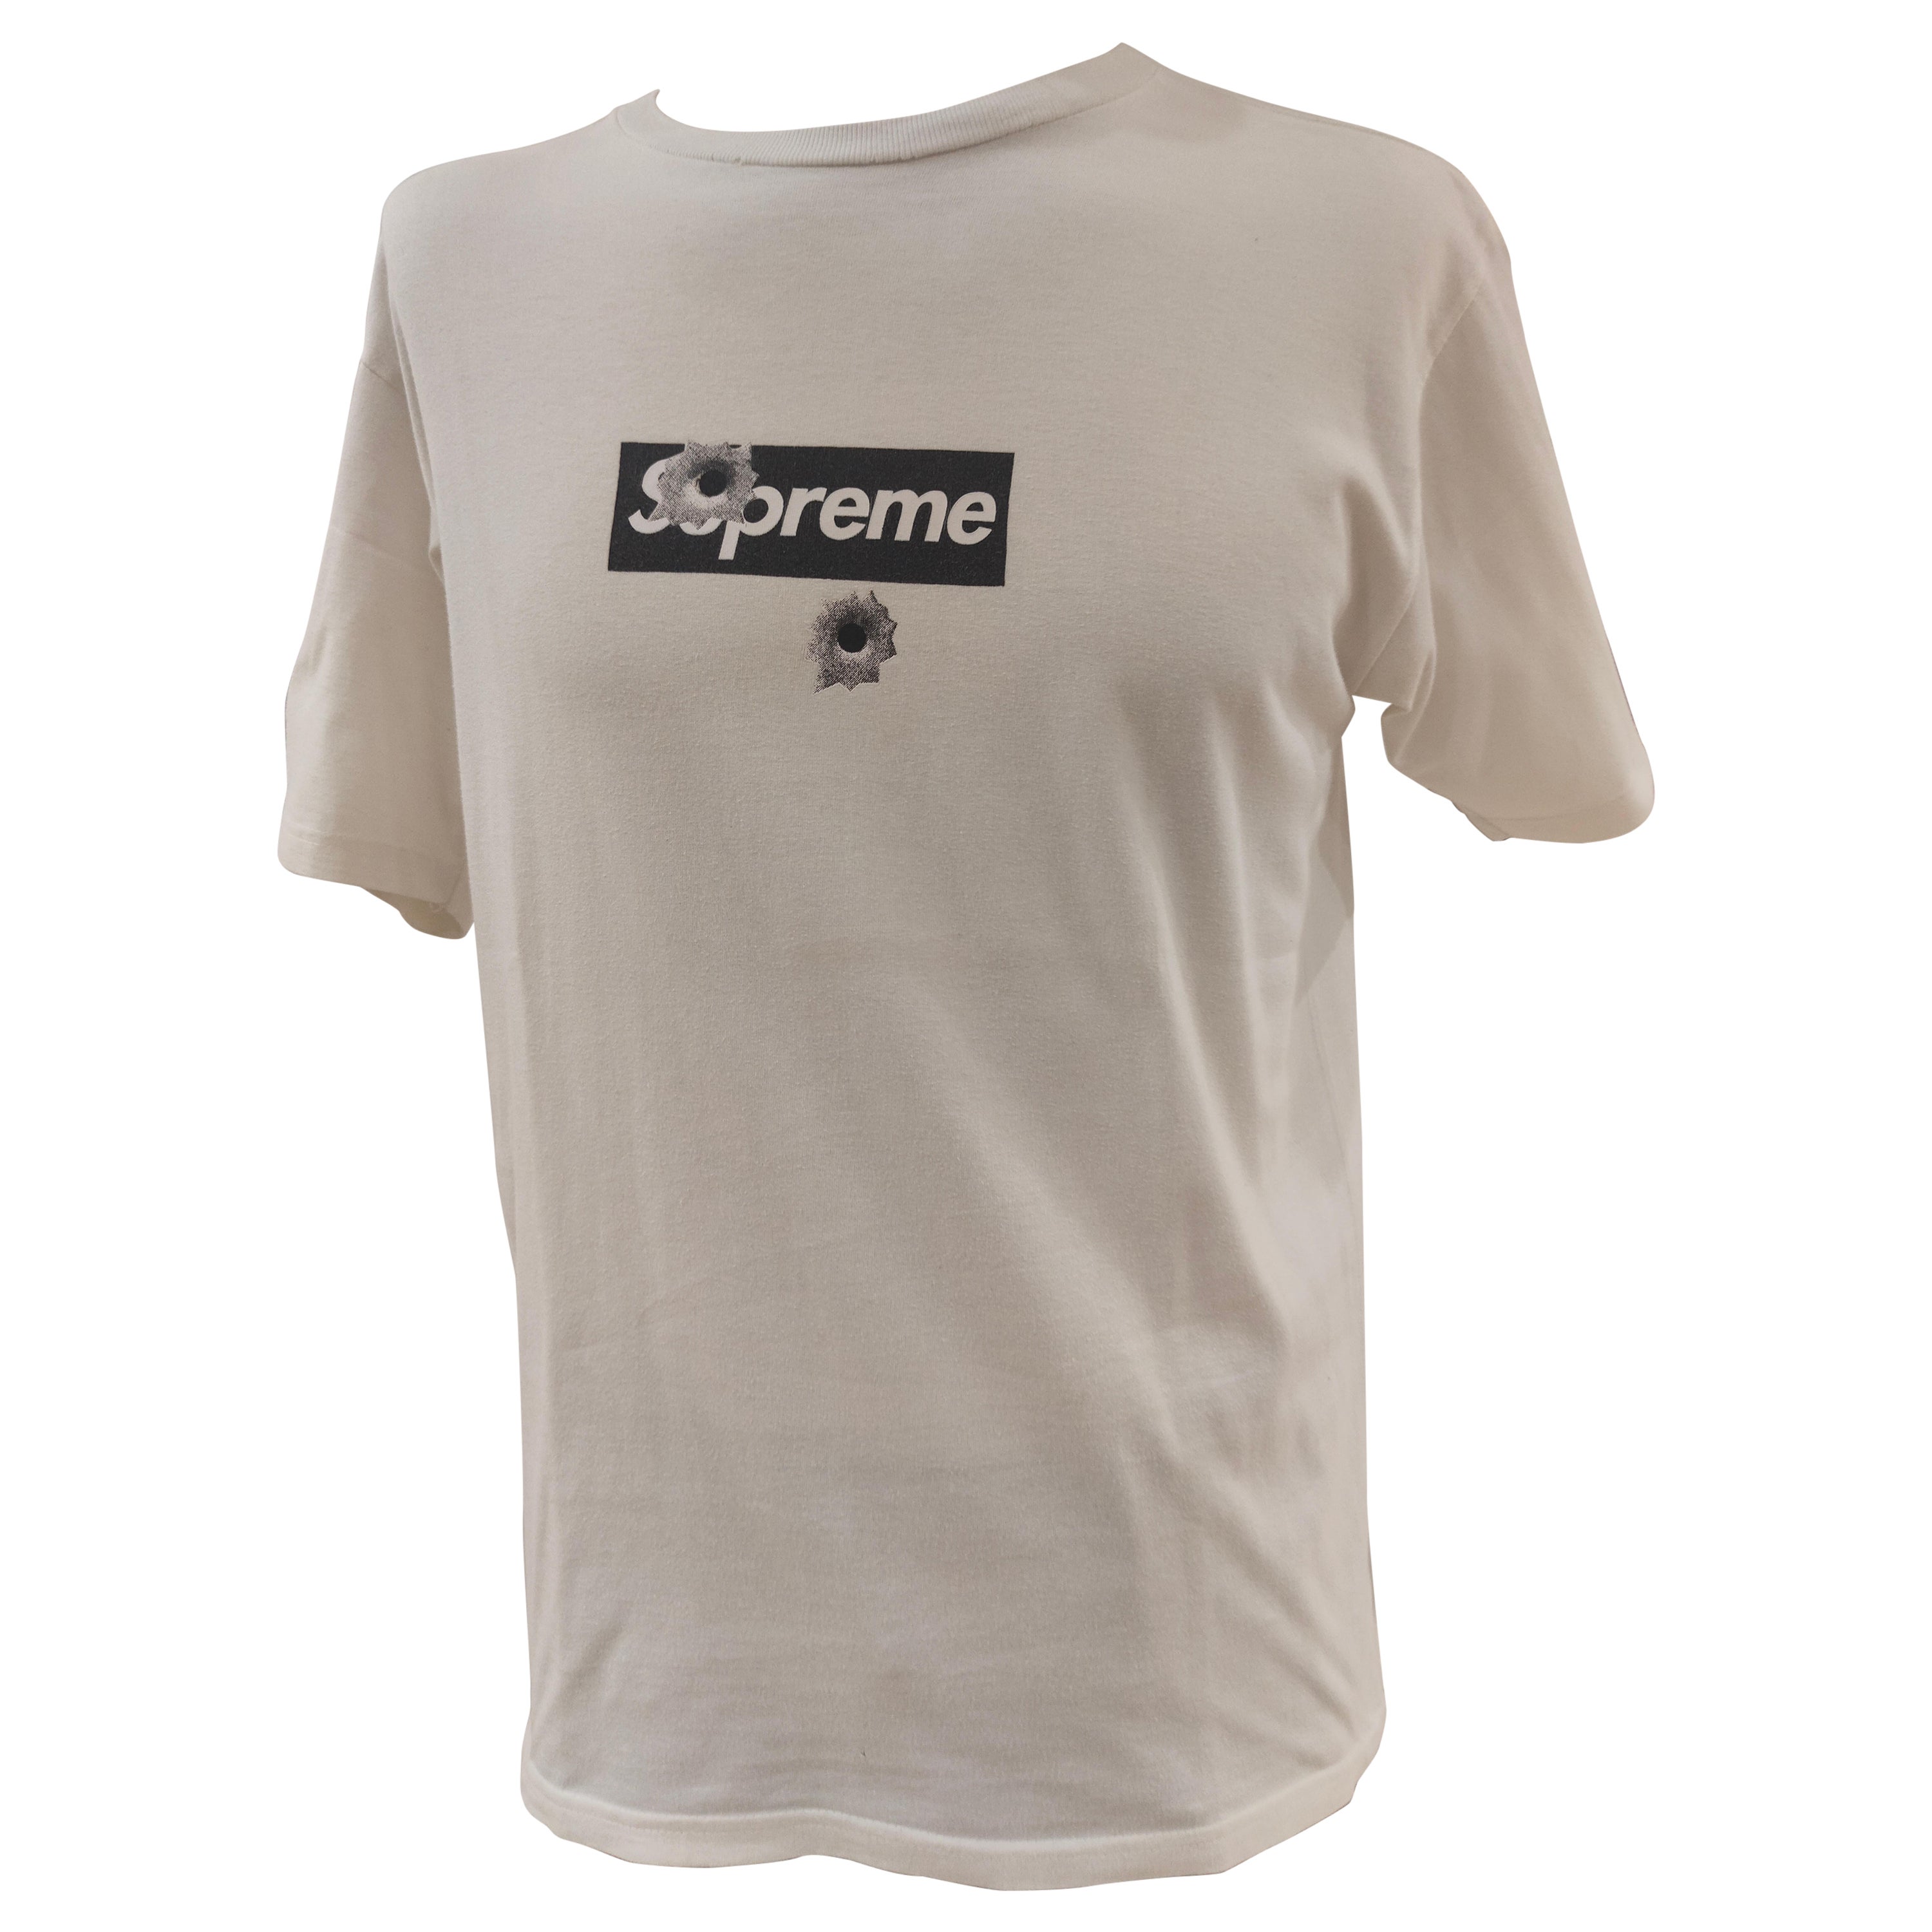 Supreme White limited edition t-shirt For Sale